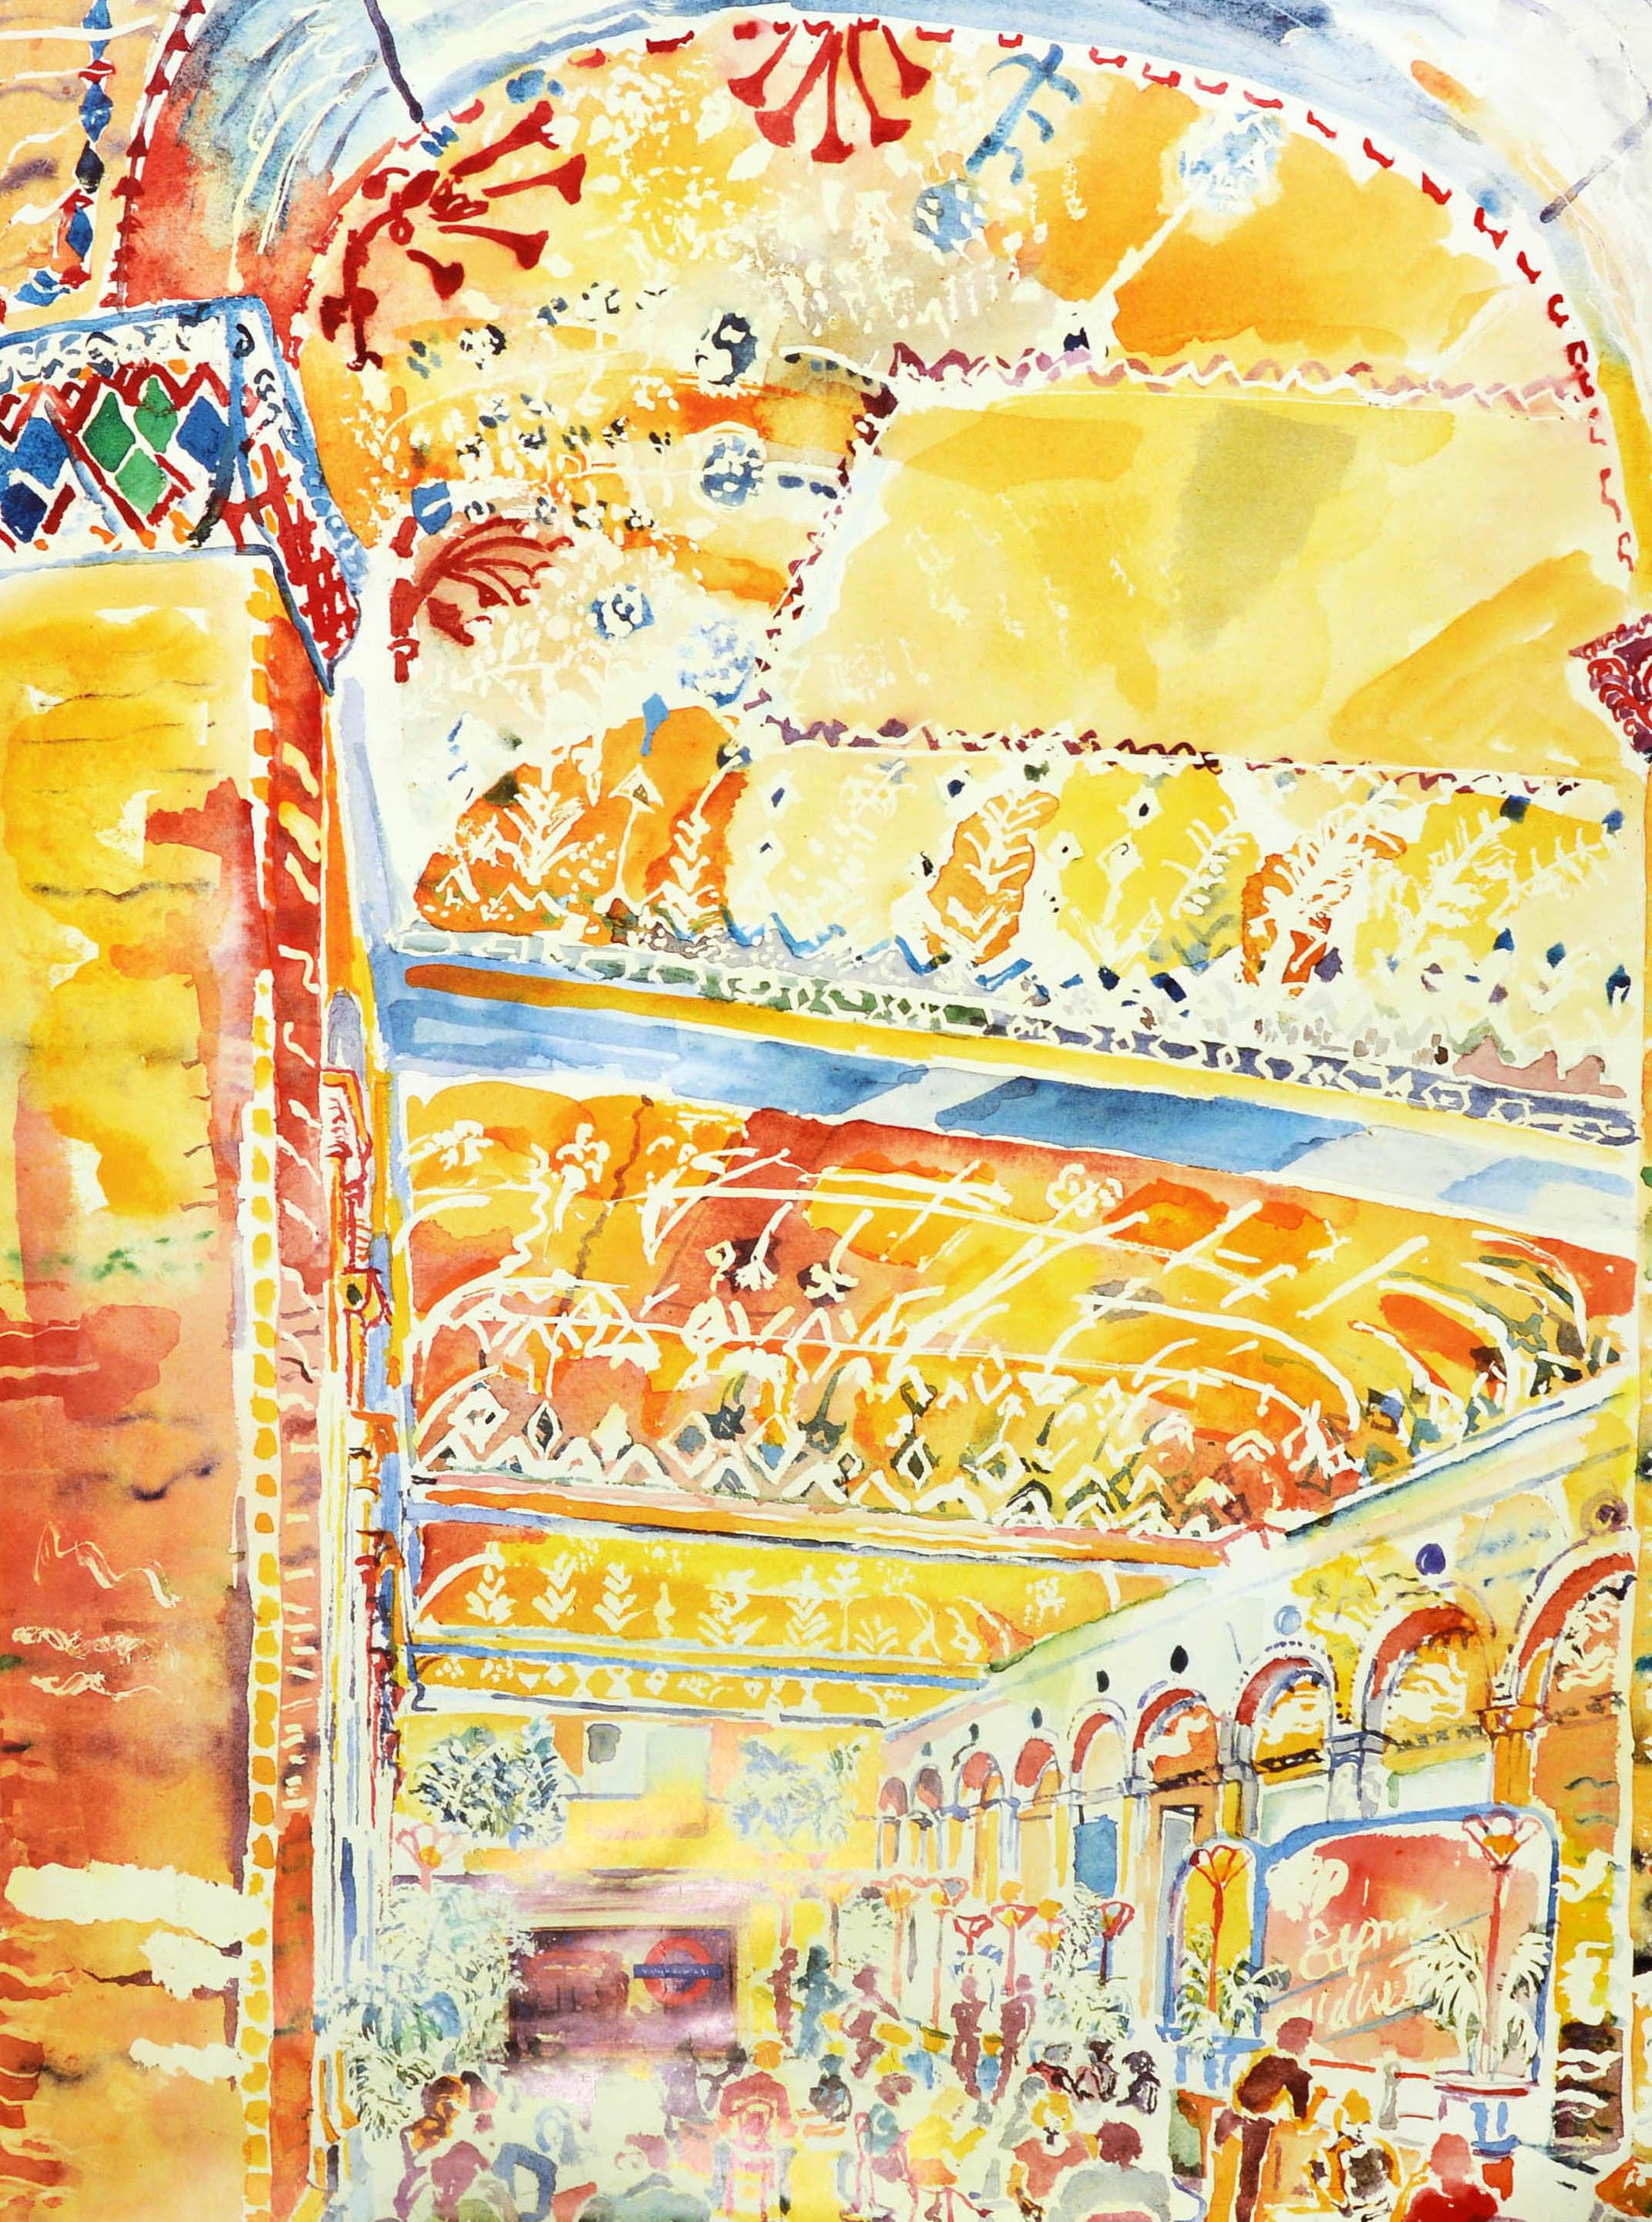 Original vintage London underground travel advertising poster - The West End by Tube The Criterion Brasserie by Celia Lyttleton One of a series of new paintings commissioned by London Underground nearest station Piccadilly Circus - featuring a great